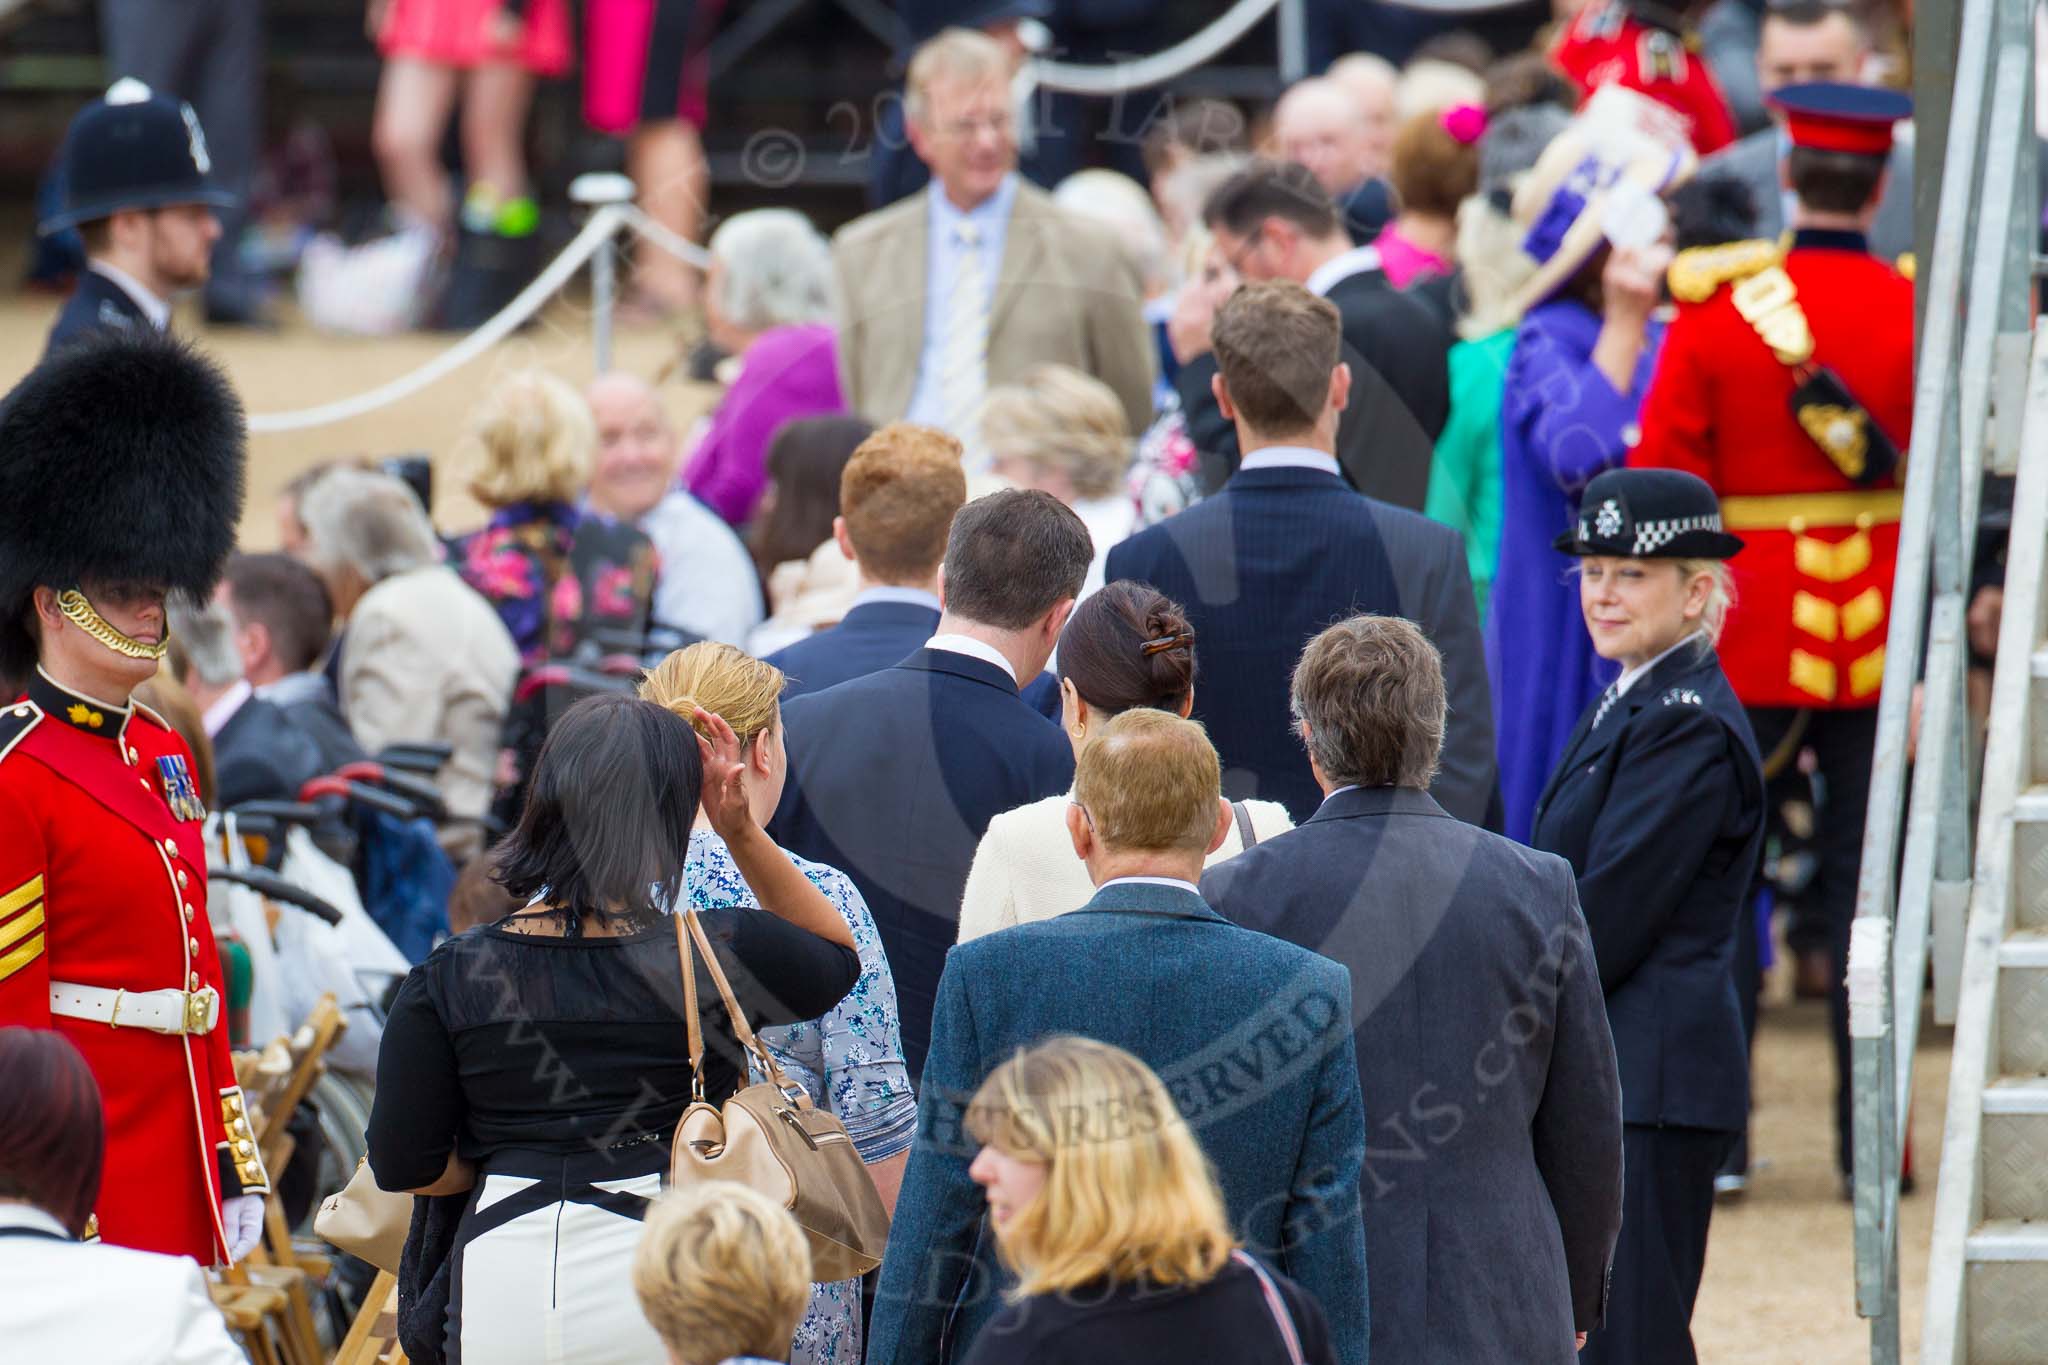 Trooping the Colour 2014.
Horse Guards Parade, Westminster,
London SW1A,

United Kingdom,
on 14 June 2014 at 09:43, image #45